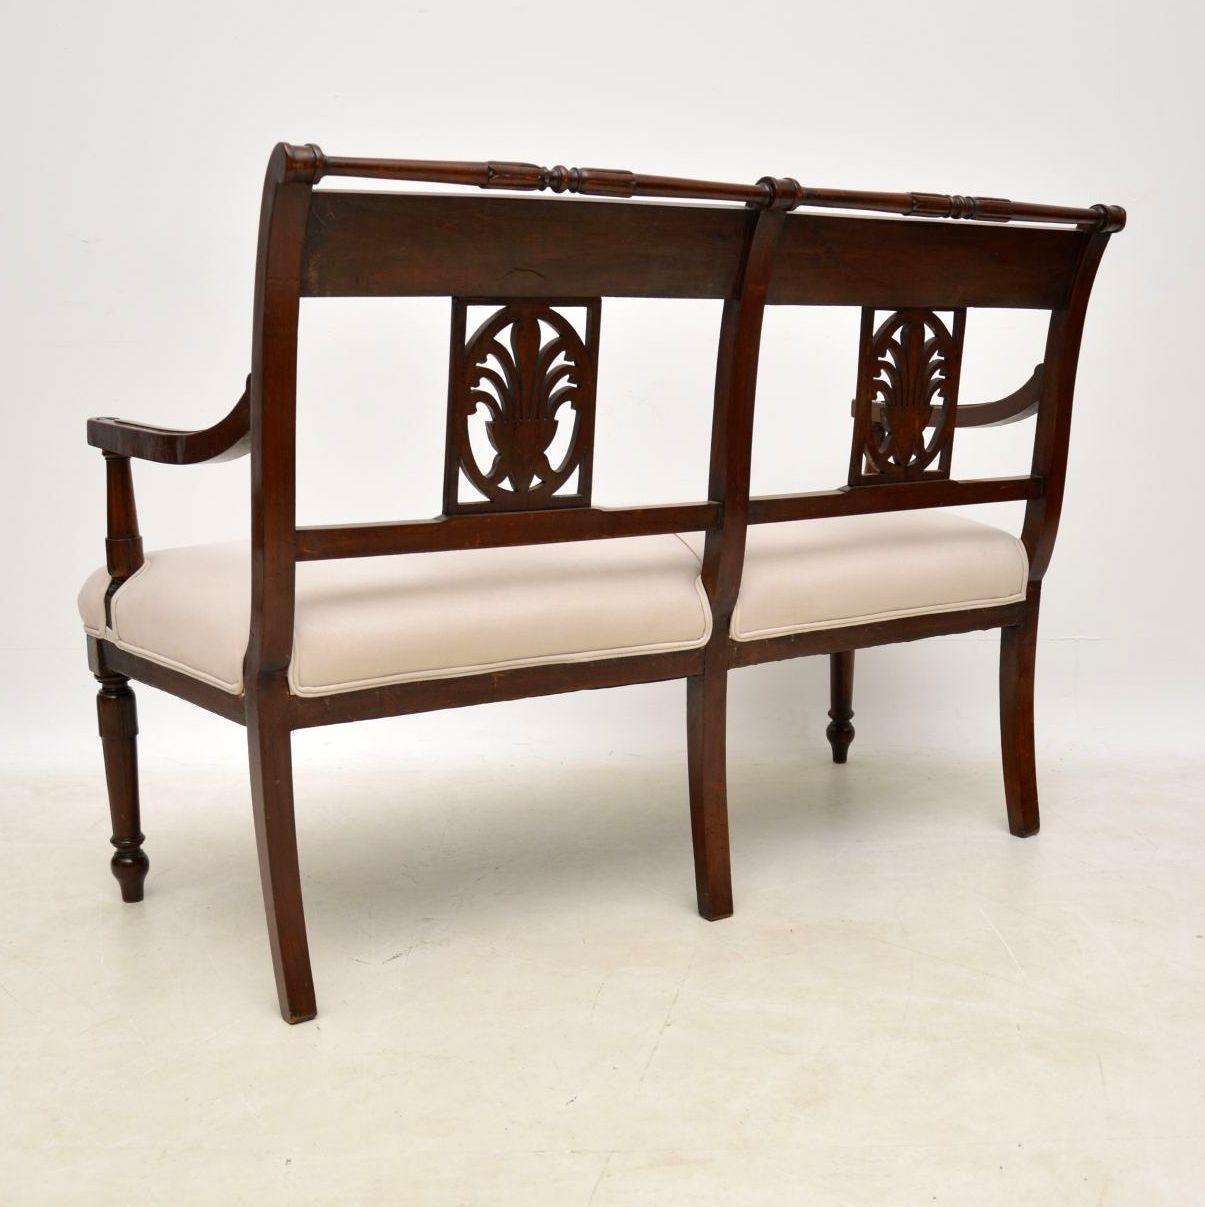 English Antique Victorian Carved Mahogany Settee